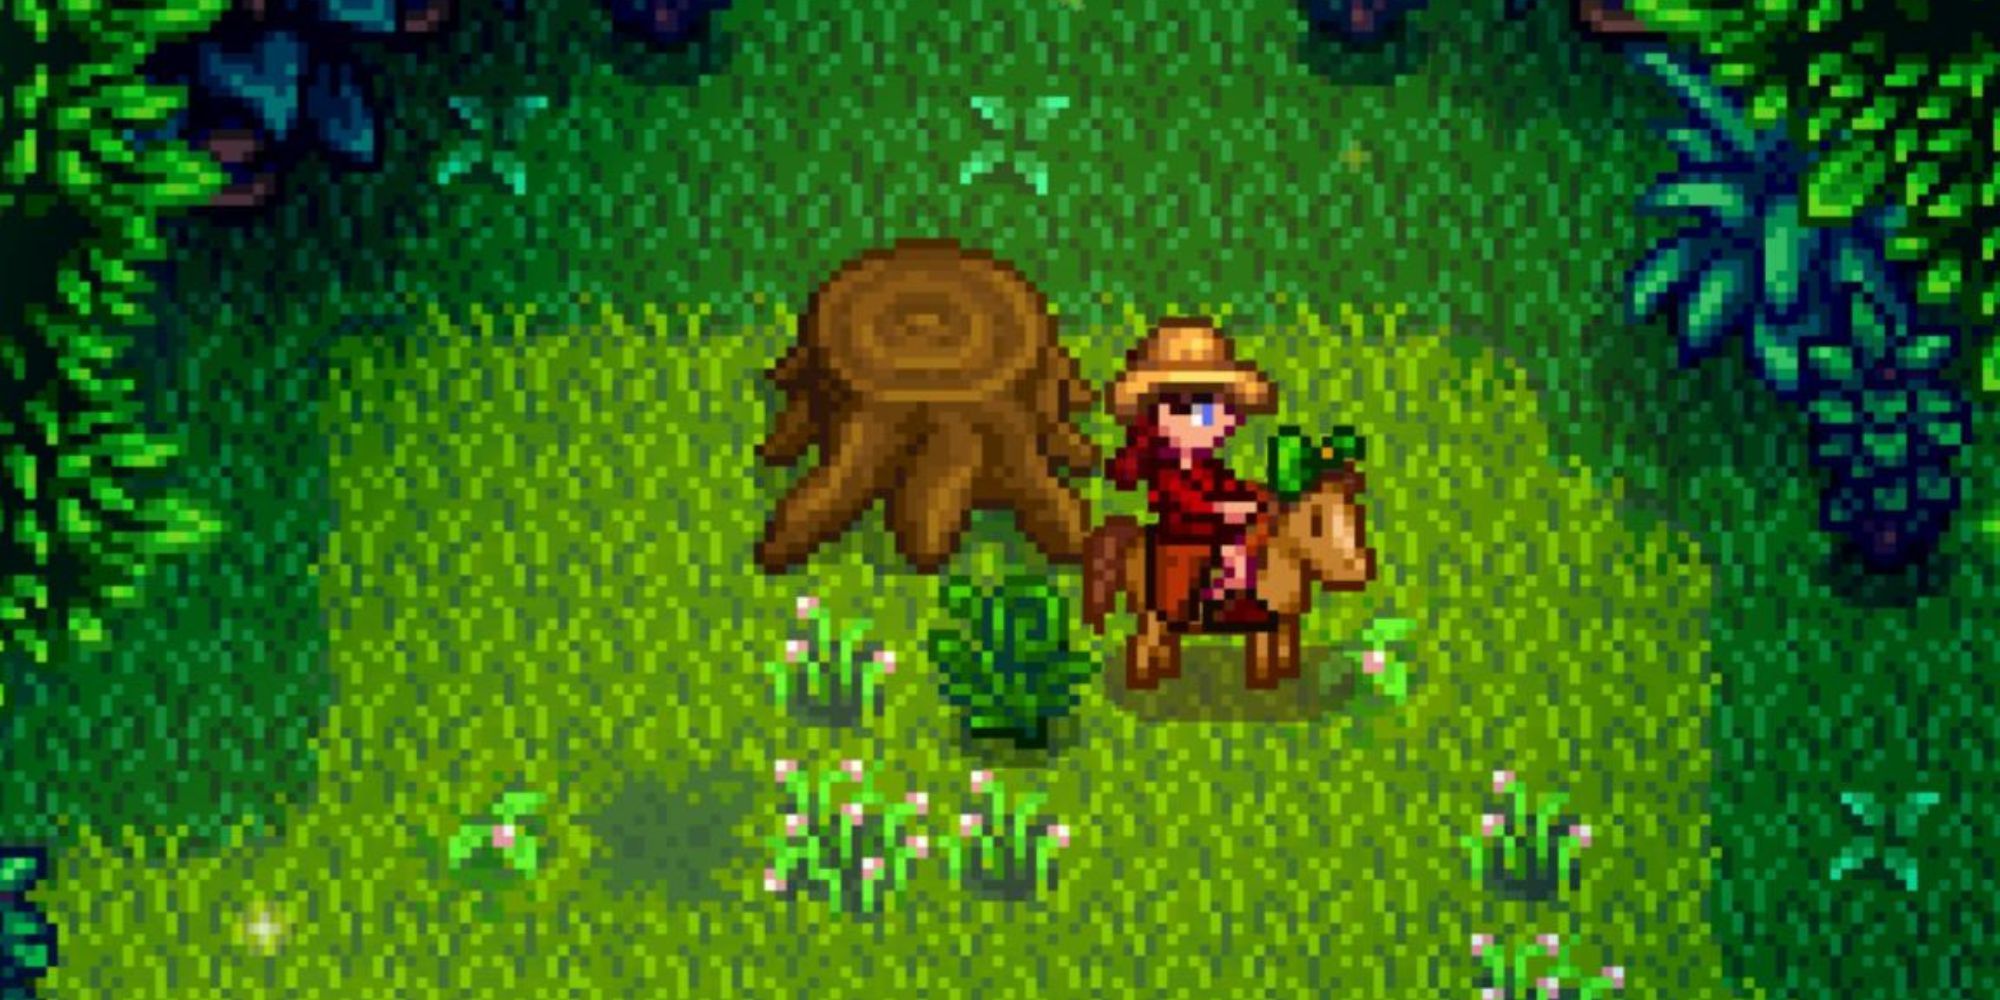 Character on horse in forest by tree stump with item on ground